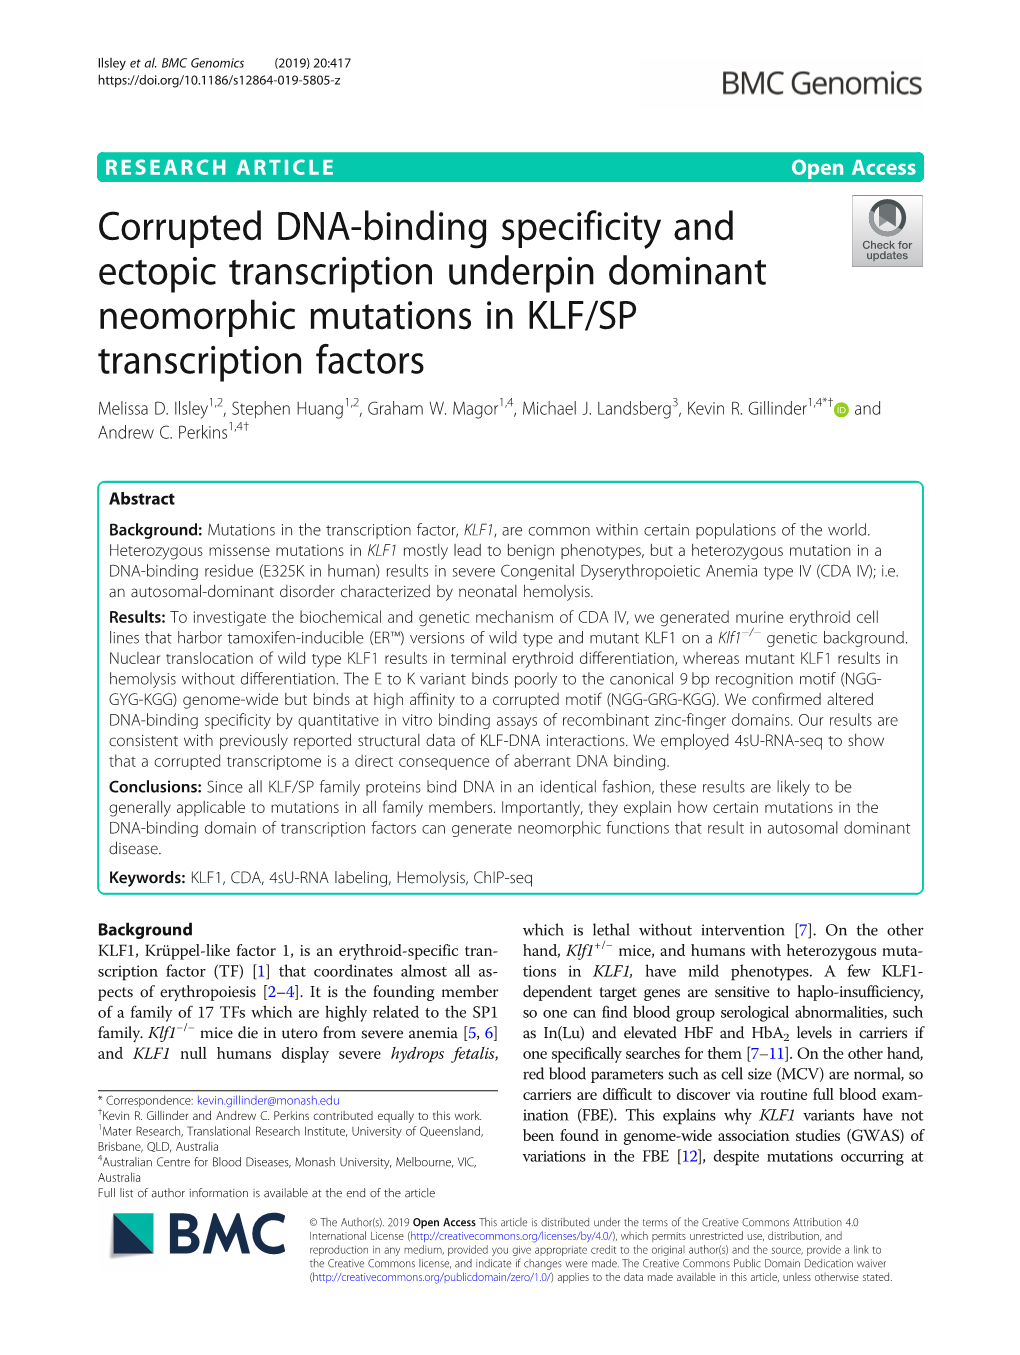 Corrupted DNA-Binding Specificity and Ectopic Transcription Underpin Dominant Neomorphic Mutations in KLF/SP Transcription Factors Melissa D